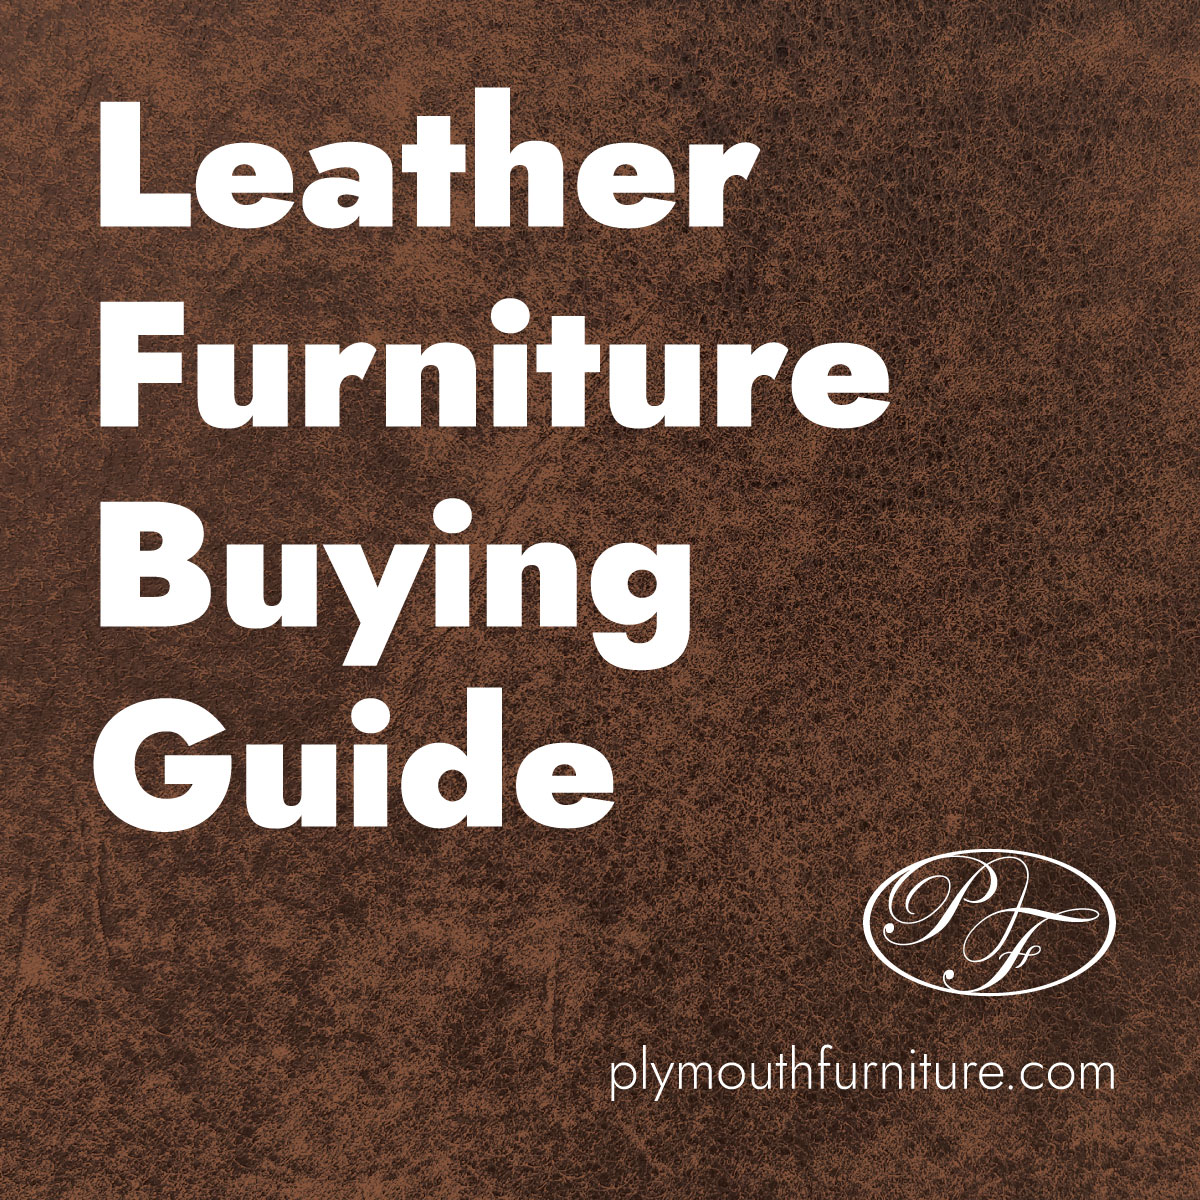 https://plymouthfurniture.com/wp-content/uploads/2022/06/Leather-Furniture-Buying-Guide.jpg